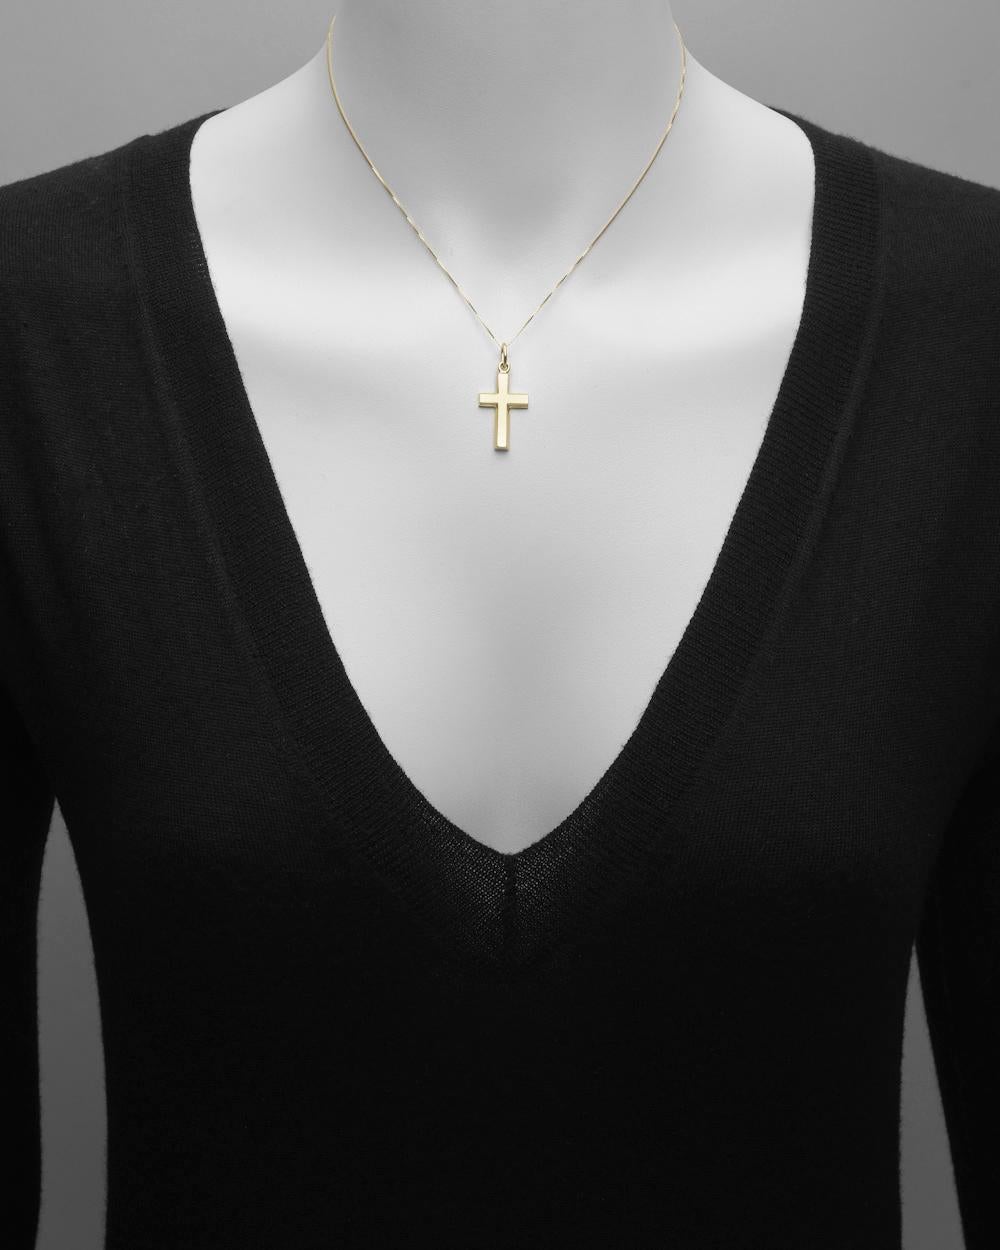 Cross pendant in polished 14k yellow gold with an elegantly beveled edge.
 
- Just under 1